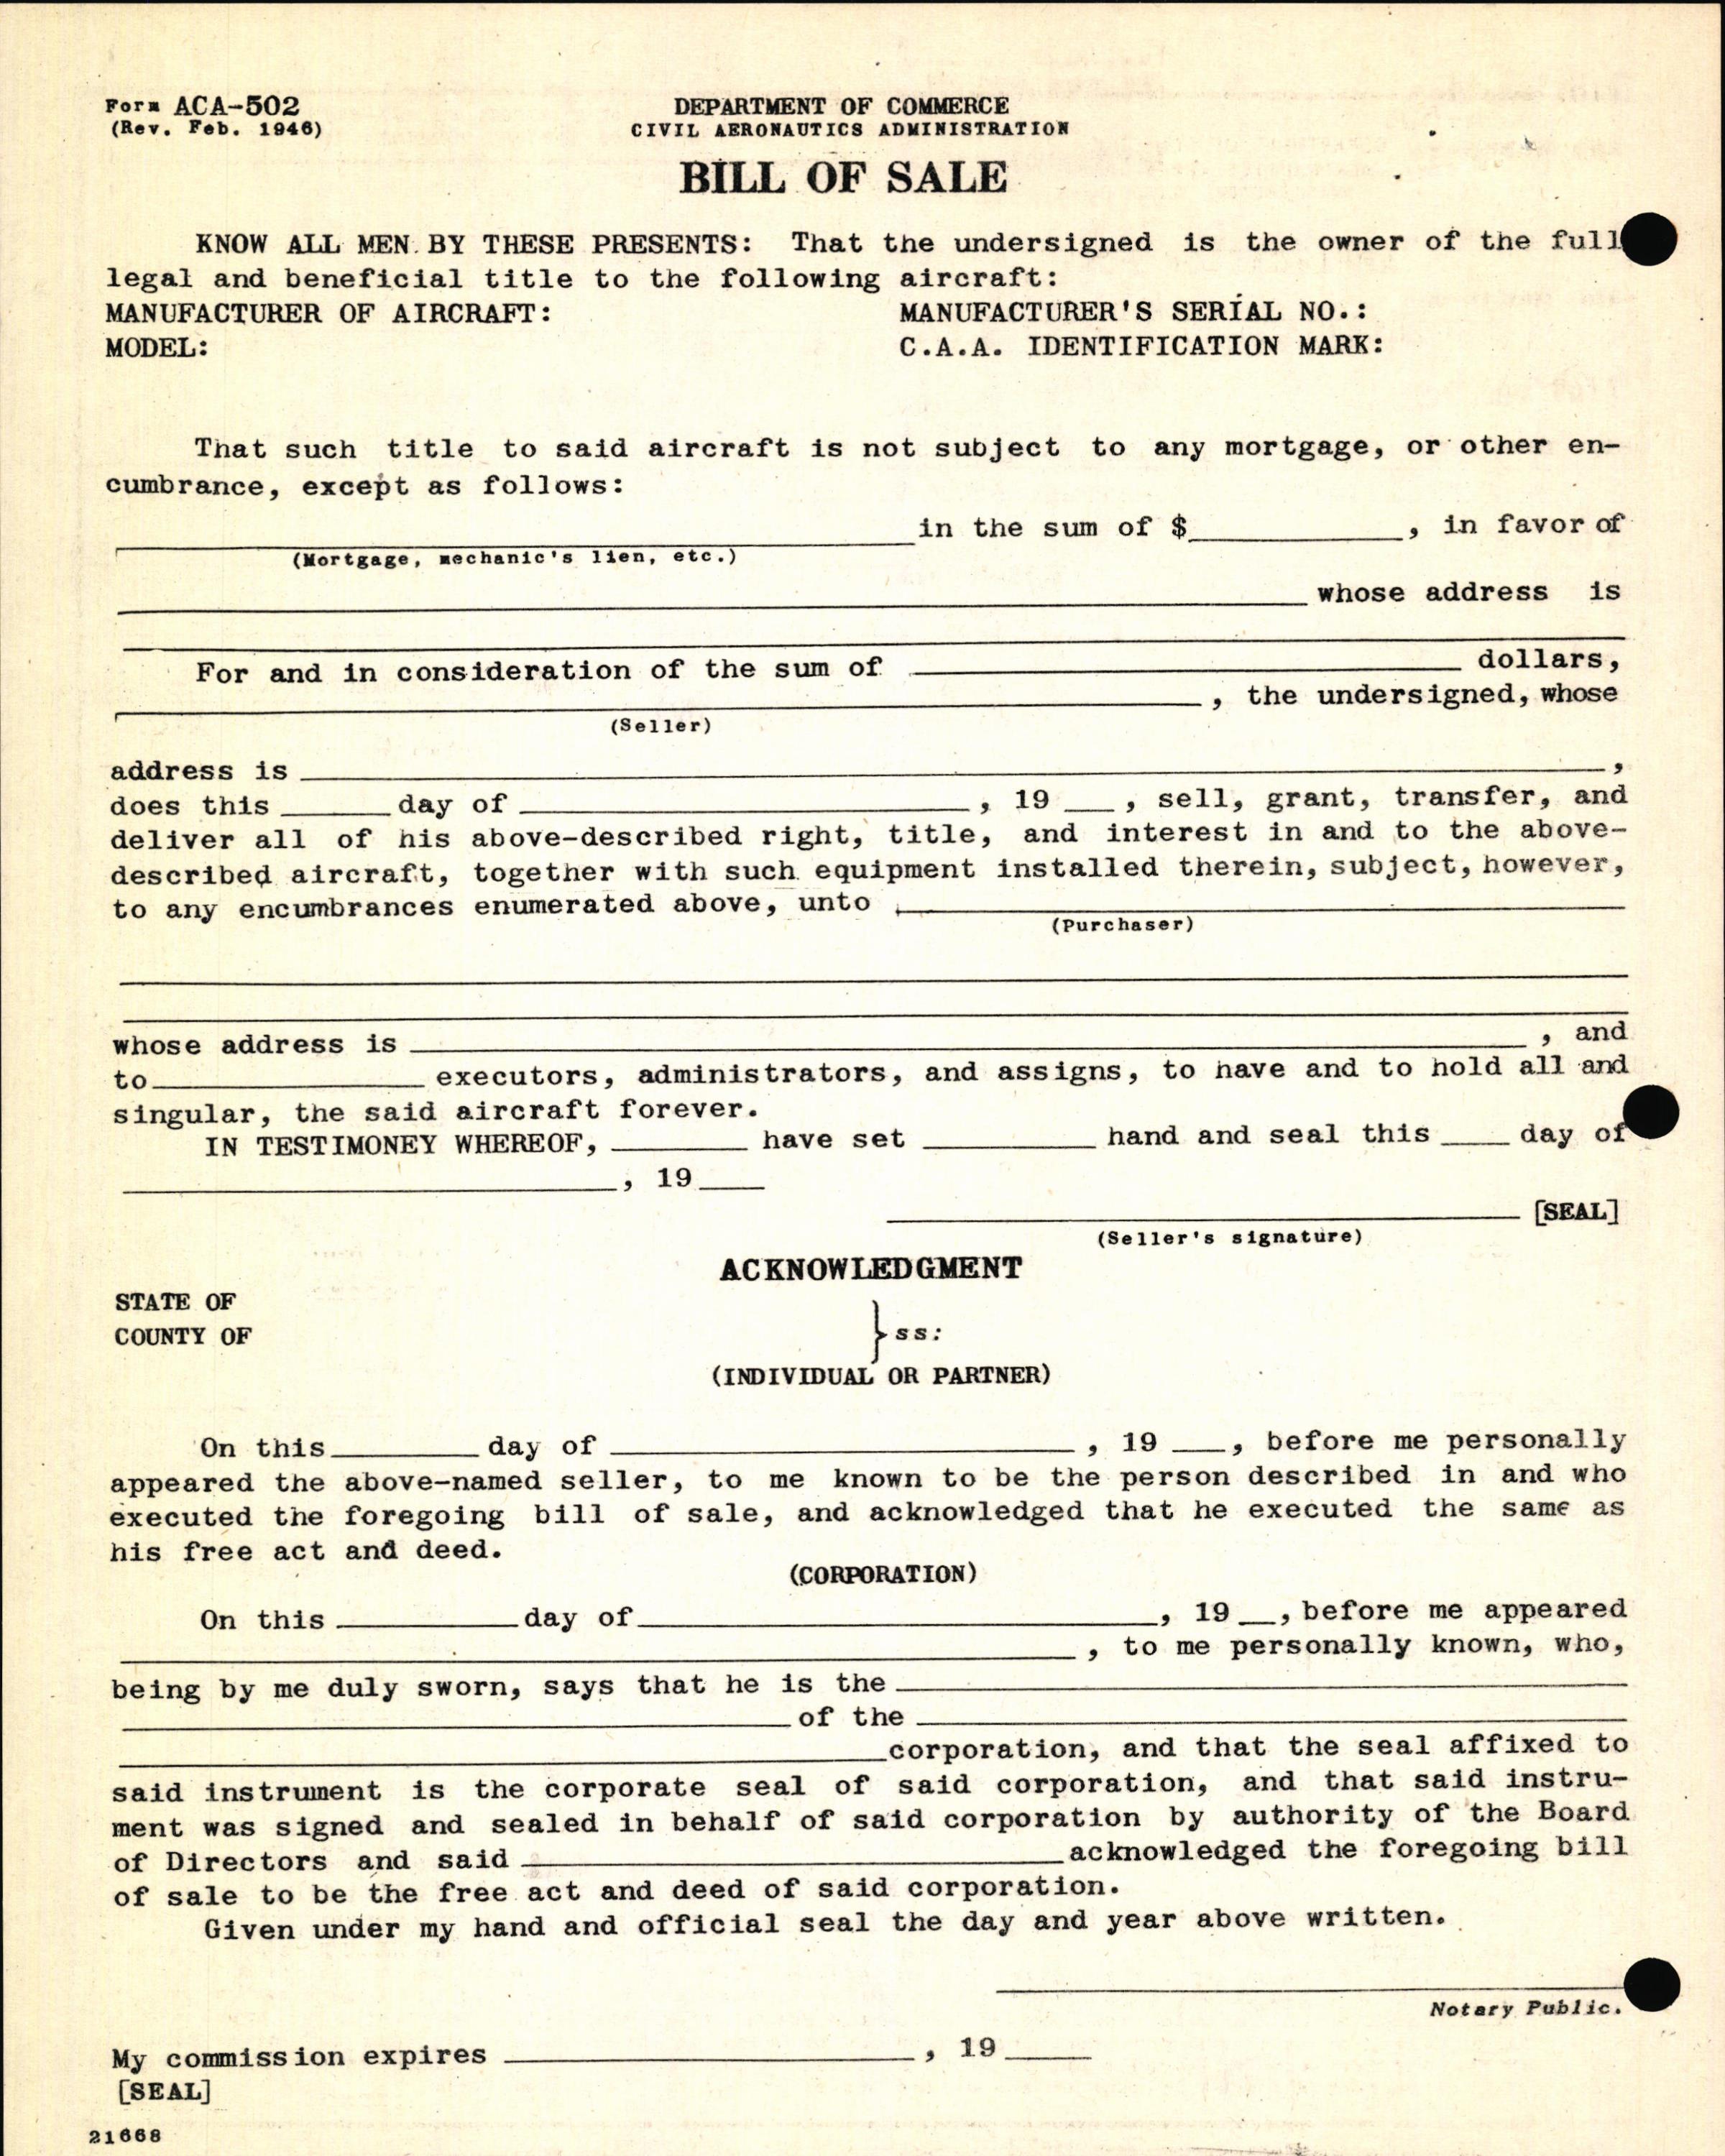 Sample page 6 from AirCorps Library document: Technical Information for Serial Number 1323